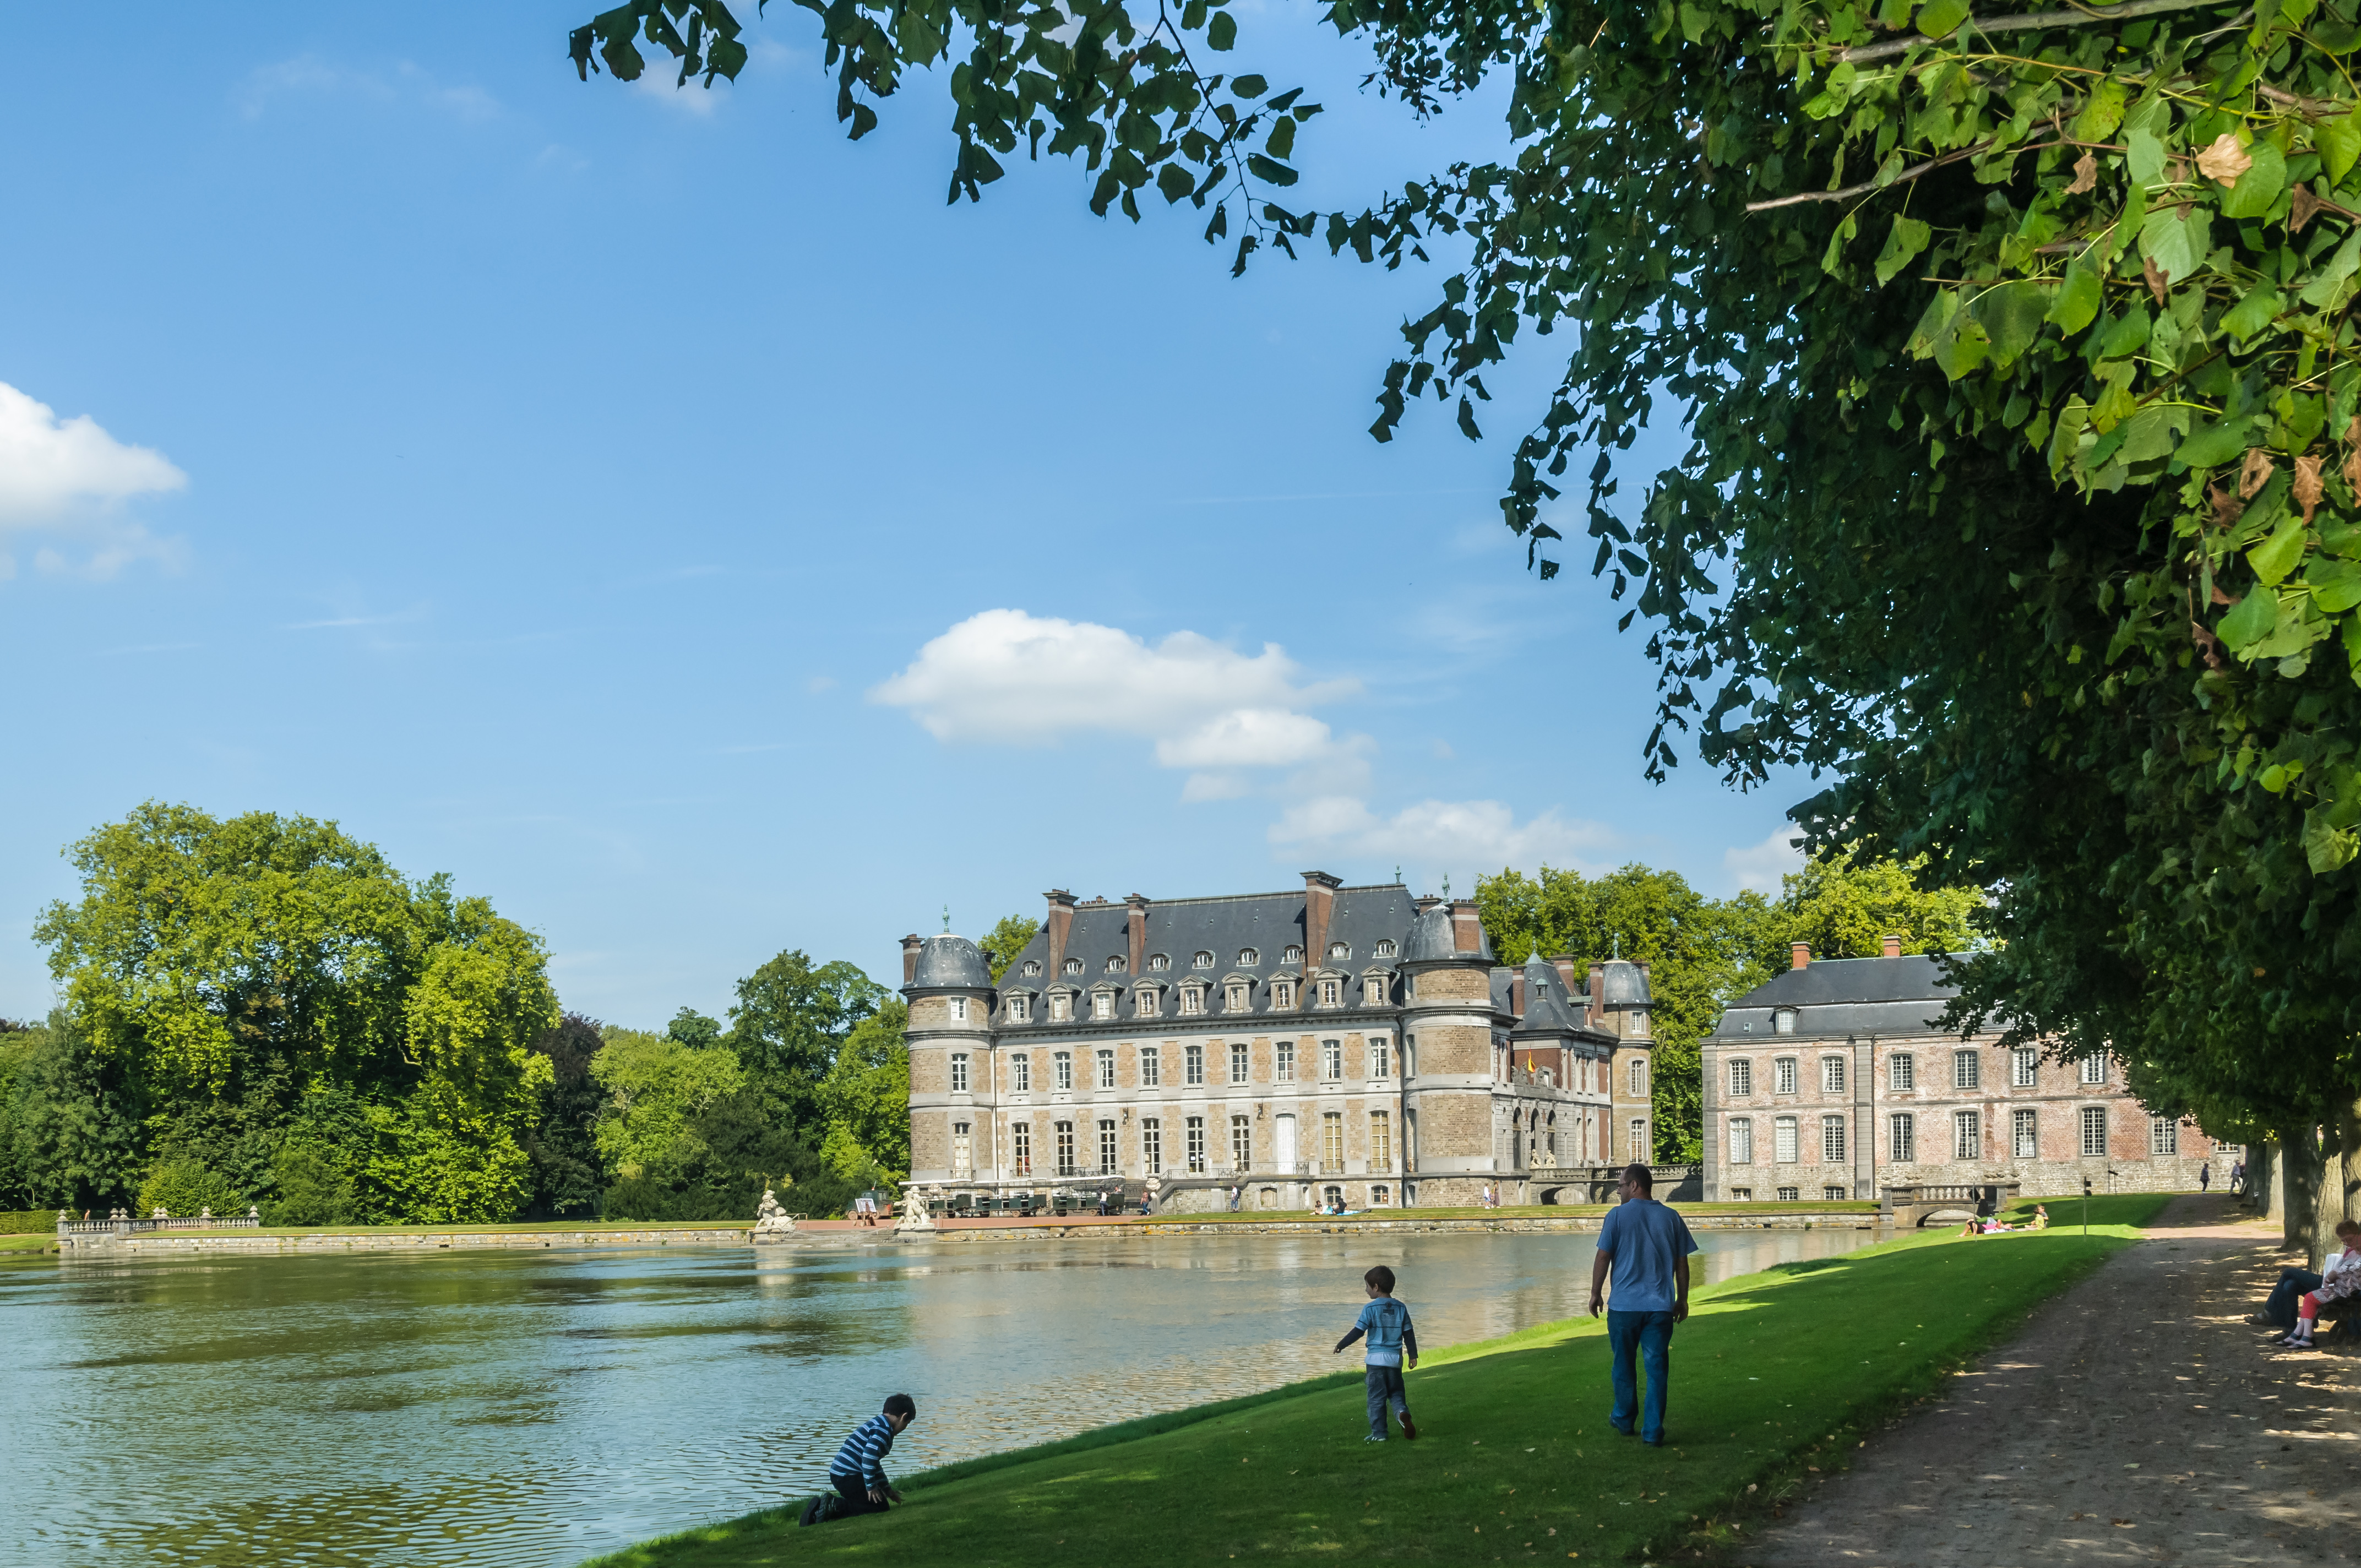 Come and explore the Château de Beloeil and its park in the province of Hainaut